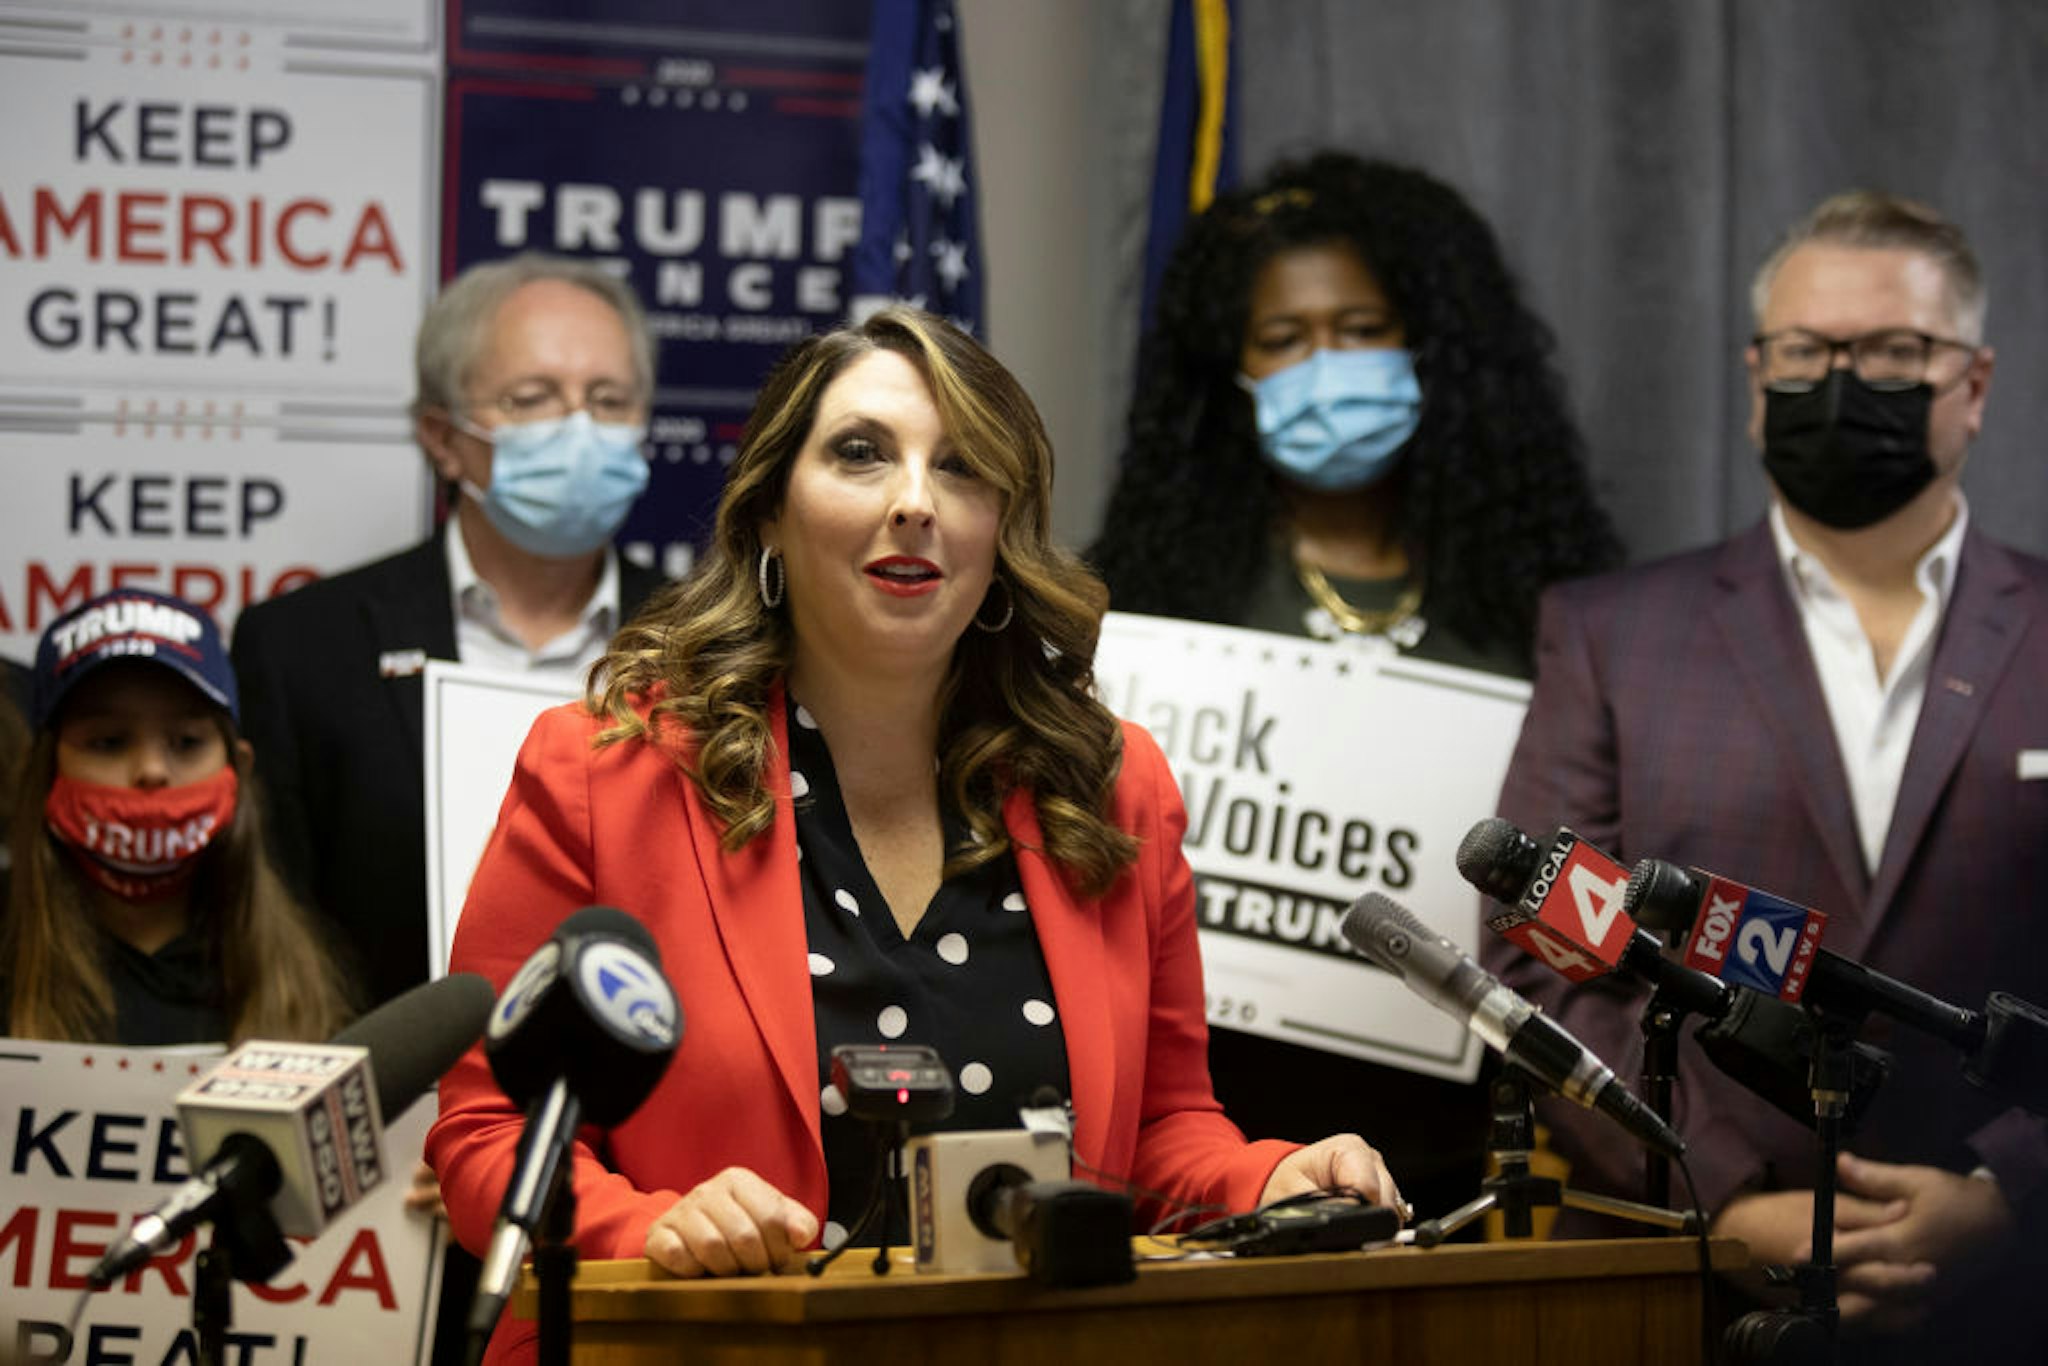 Republican National Committee Chairwoman Ronna McDaniel speaks during the Trump Victory press conference on November 6, 2020 in Bloomfield Hills, Michigan.